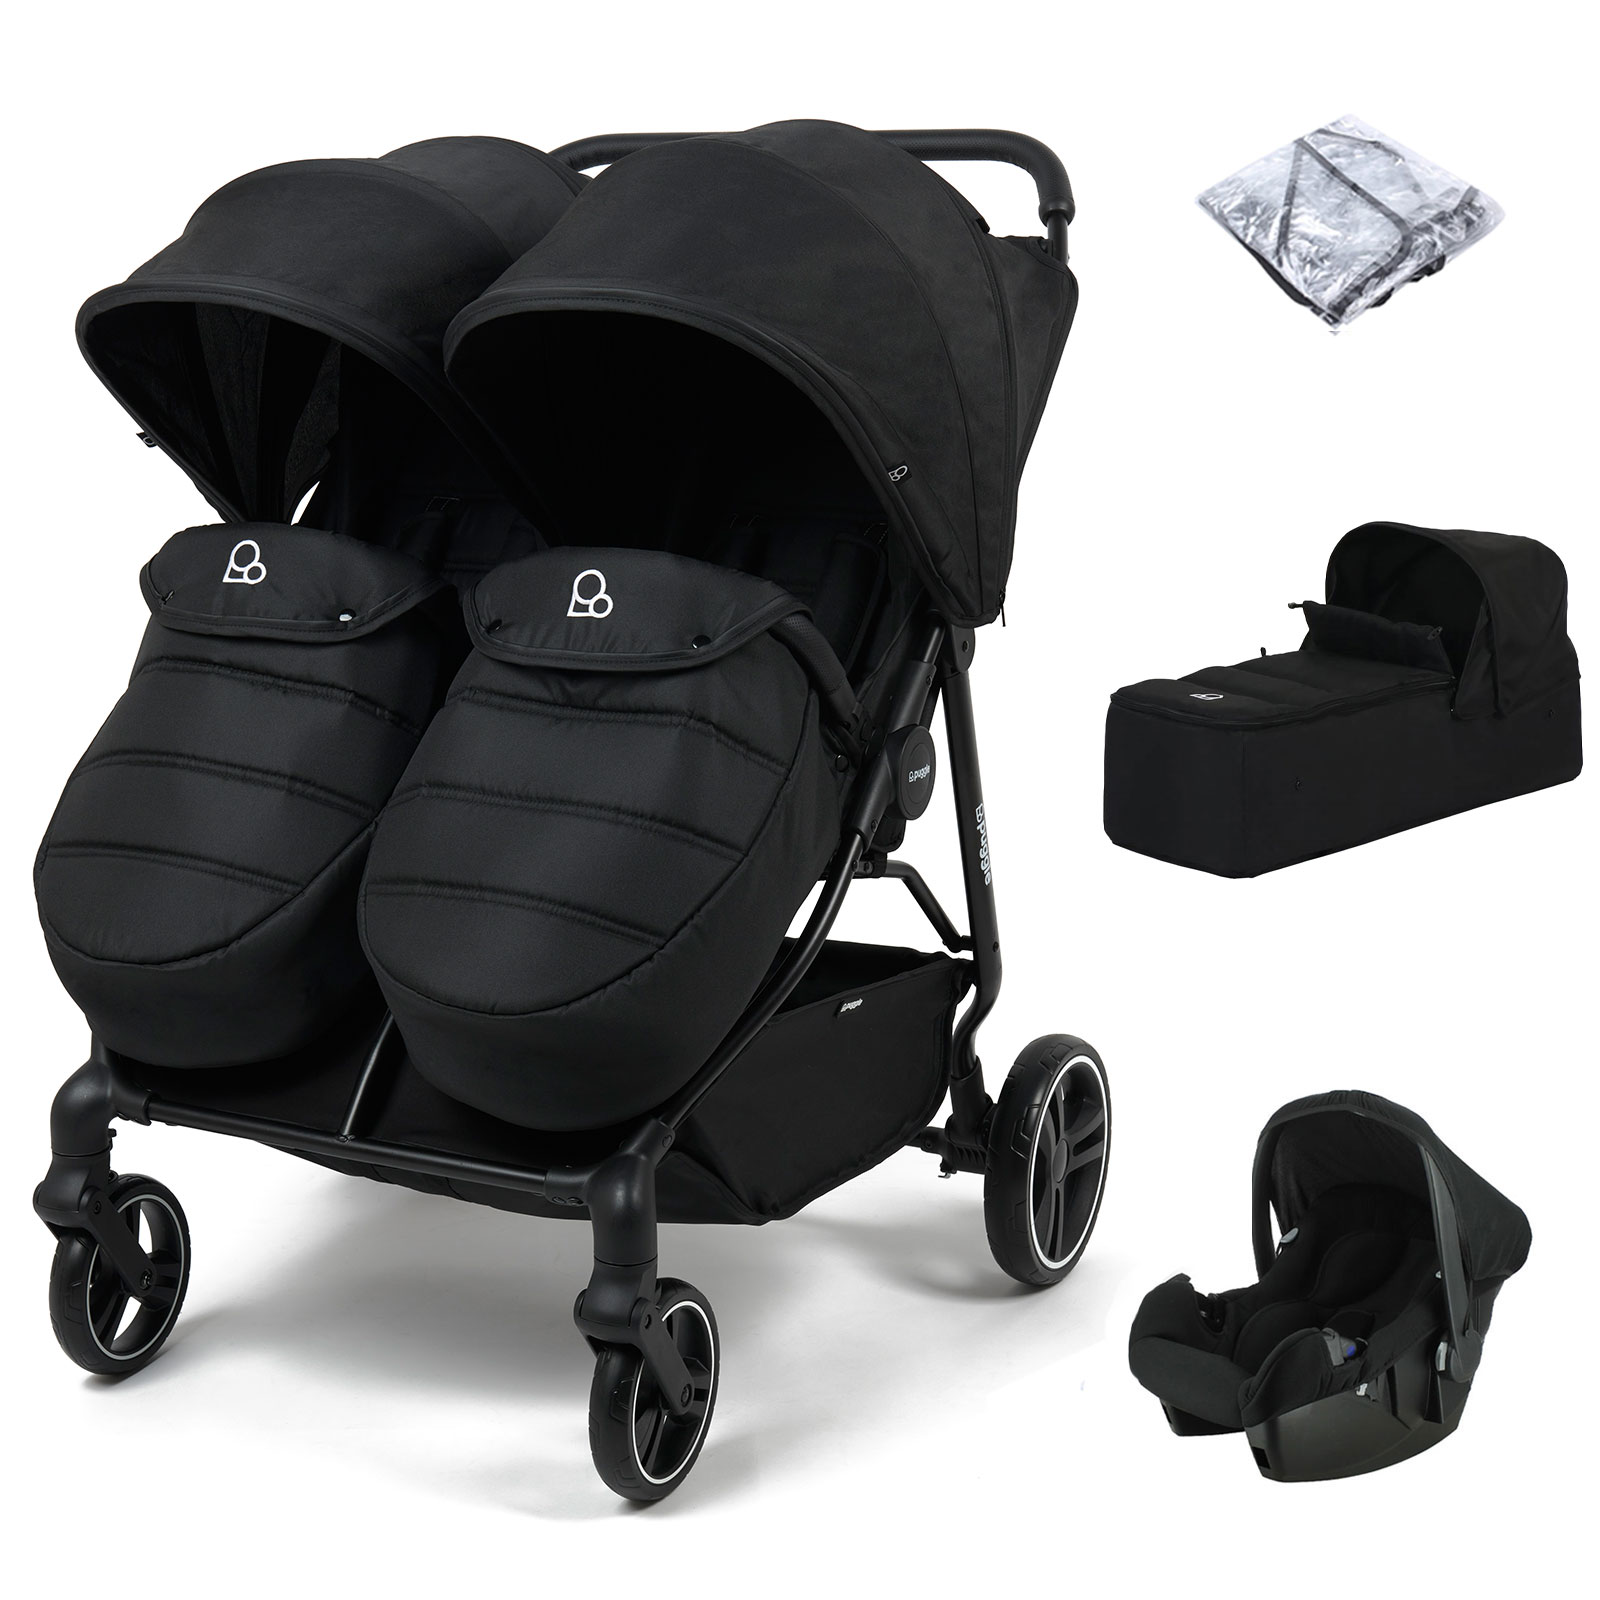 Puggle Urban City Slimline Easyfold Twin Travel System Bundle with Beone Car Seat & Soft Carrycot - Storm Black